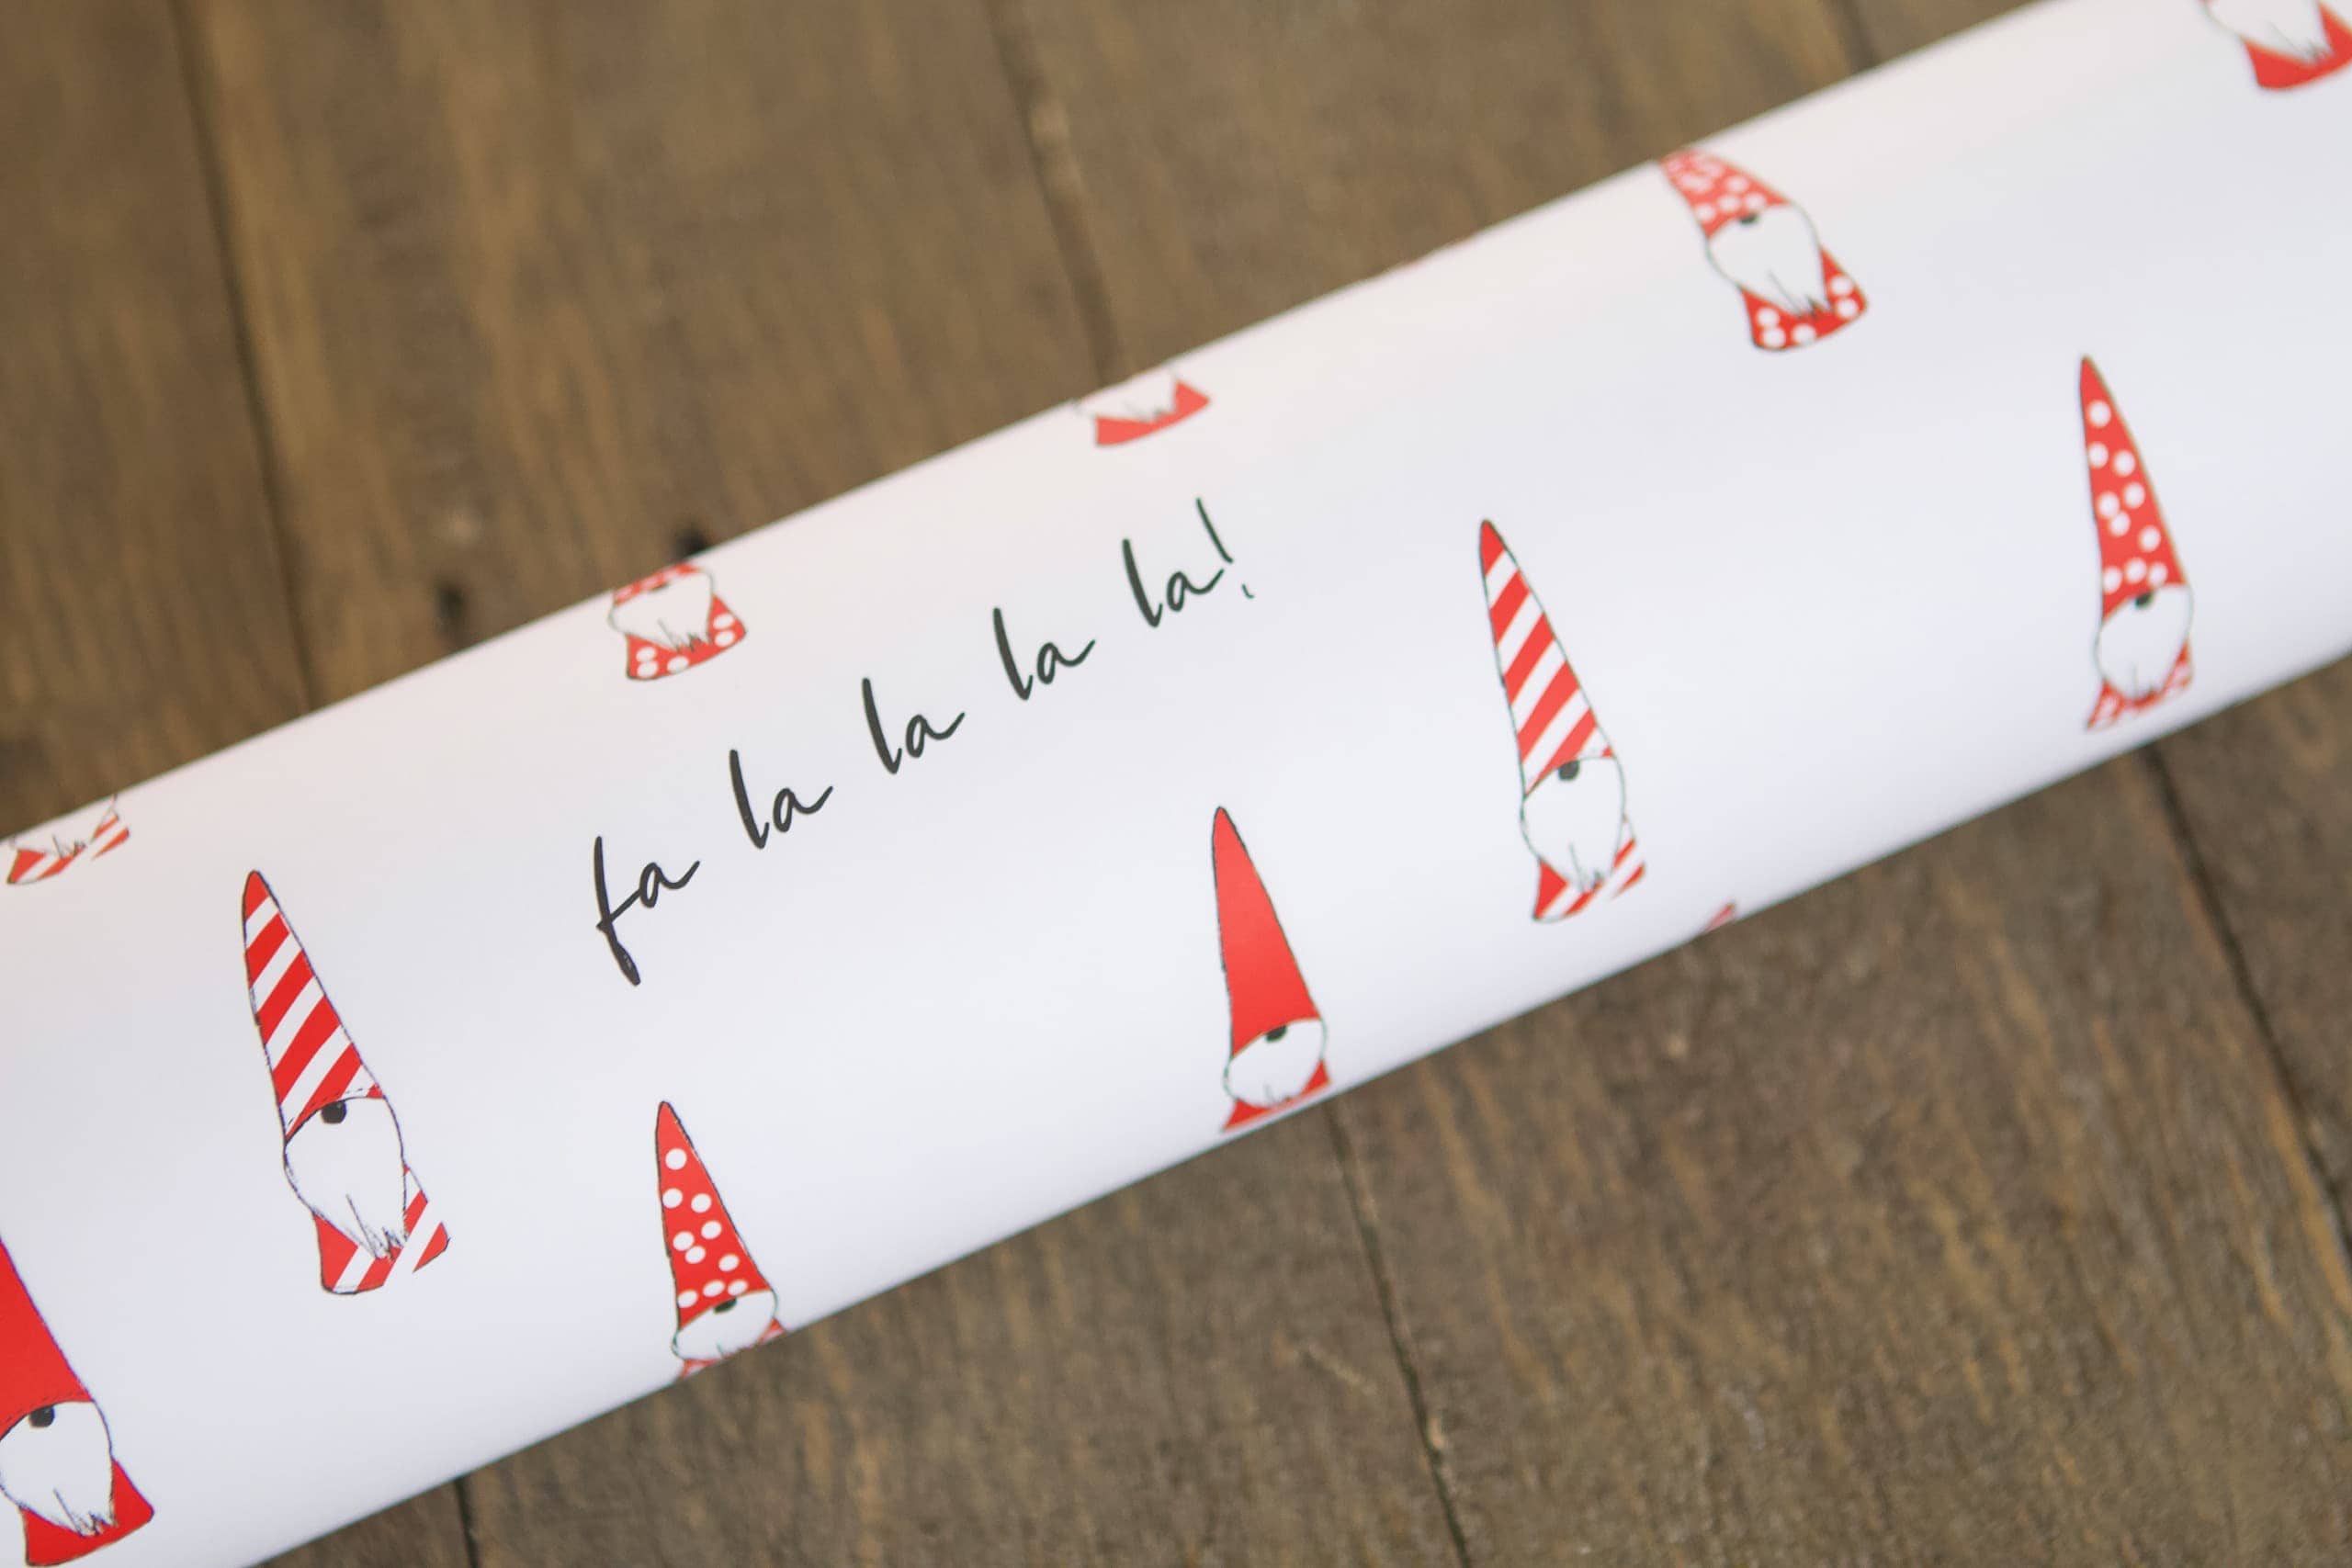 Handmade wrapping paper from Amazon Handmade